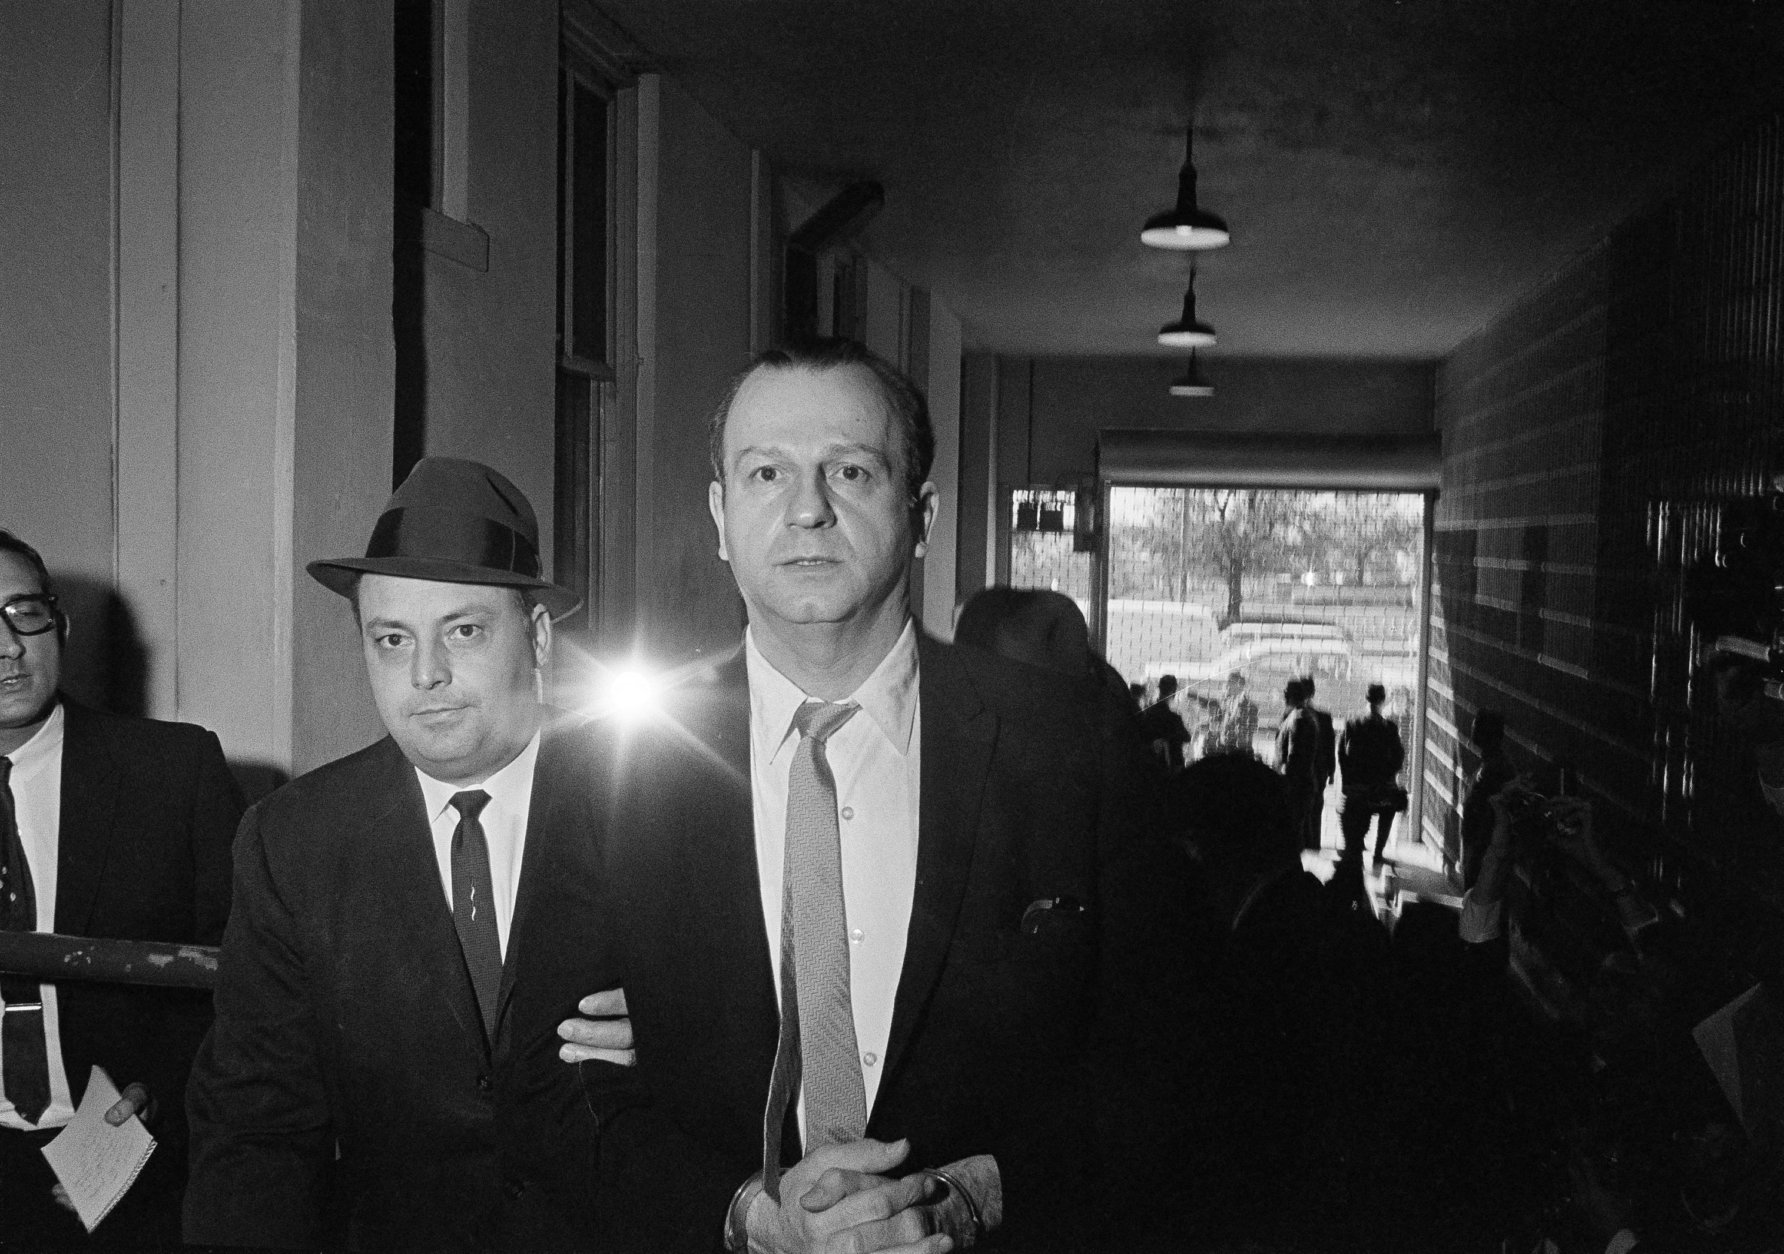 Jack Ruby, who shot and killed Lee Harvey Oswald, is shown being returned to jail after a psychiatric examination in Dallas, Tex., Jan. 28, 1964.  (AP Photo/Ferd Kaufman)